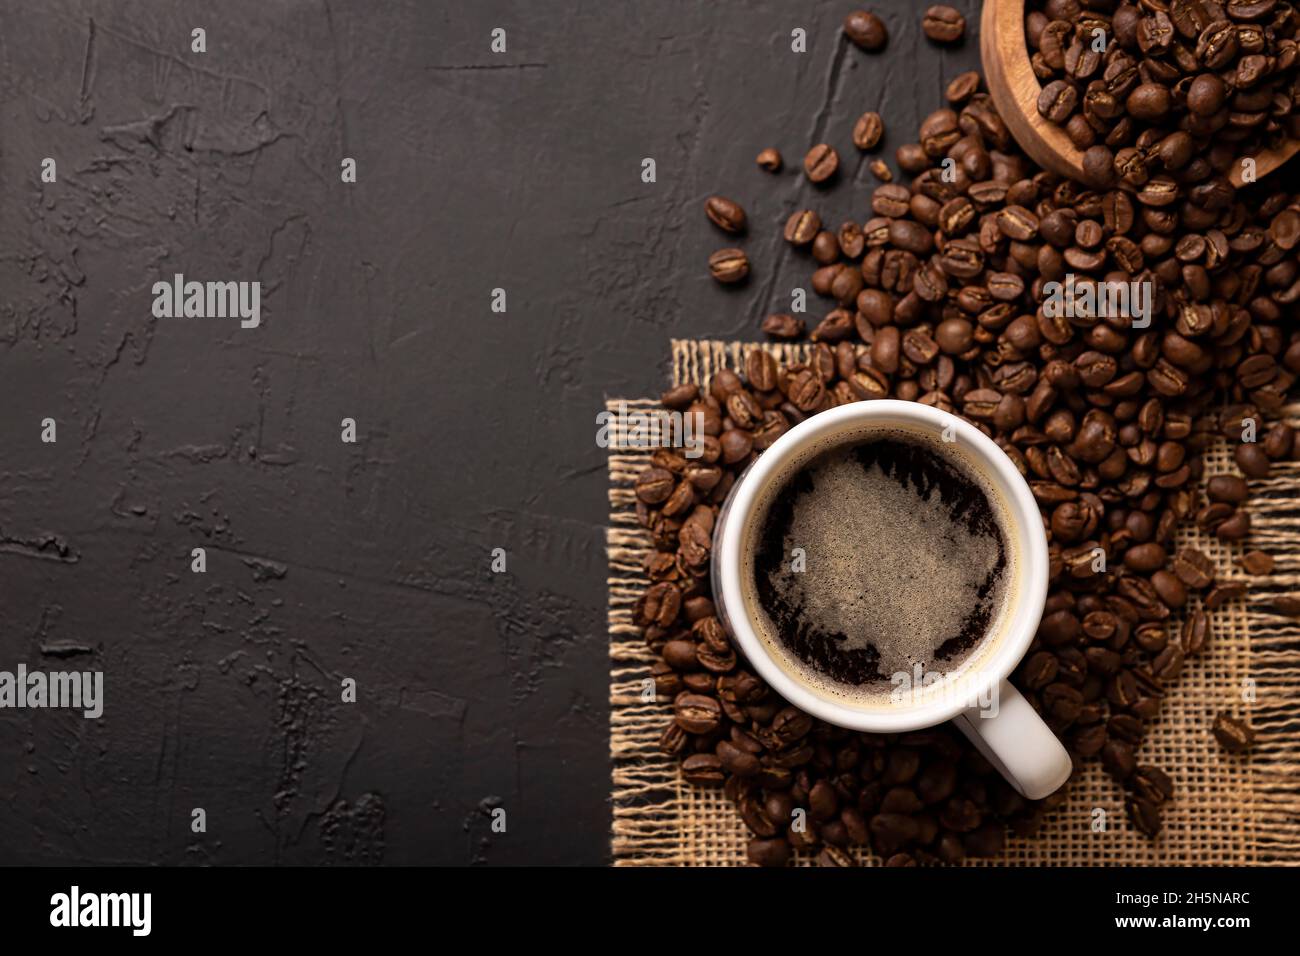 White lungo cup with hot coffee drink and toasted coffee beans scattered on a rustic black table. Top view with Copy space for your text Stock Photo